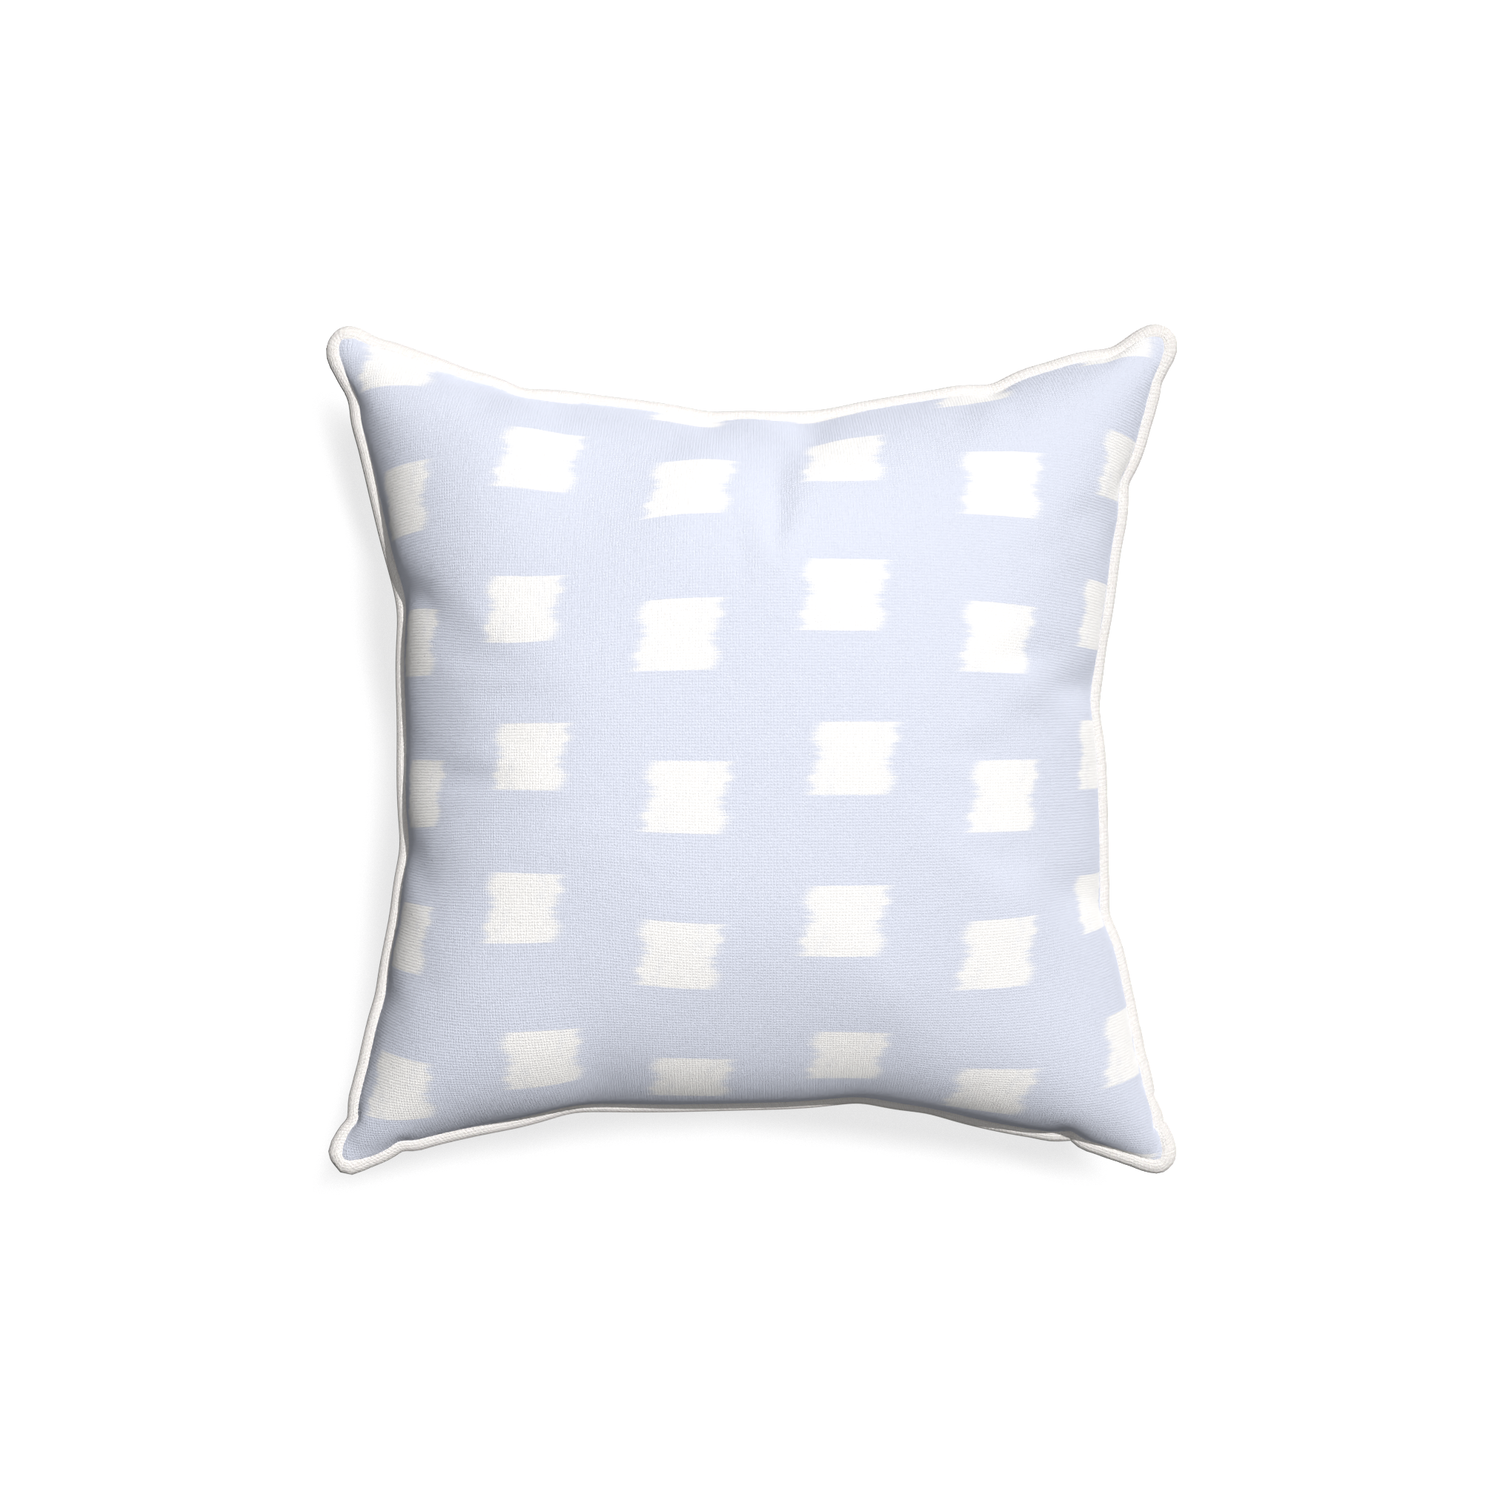 18-square denton custom sky blue patternpillow with snow piping on white background